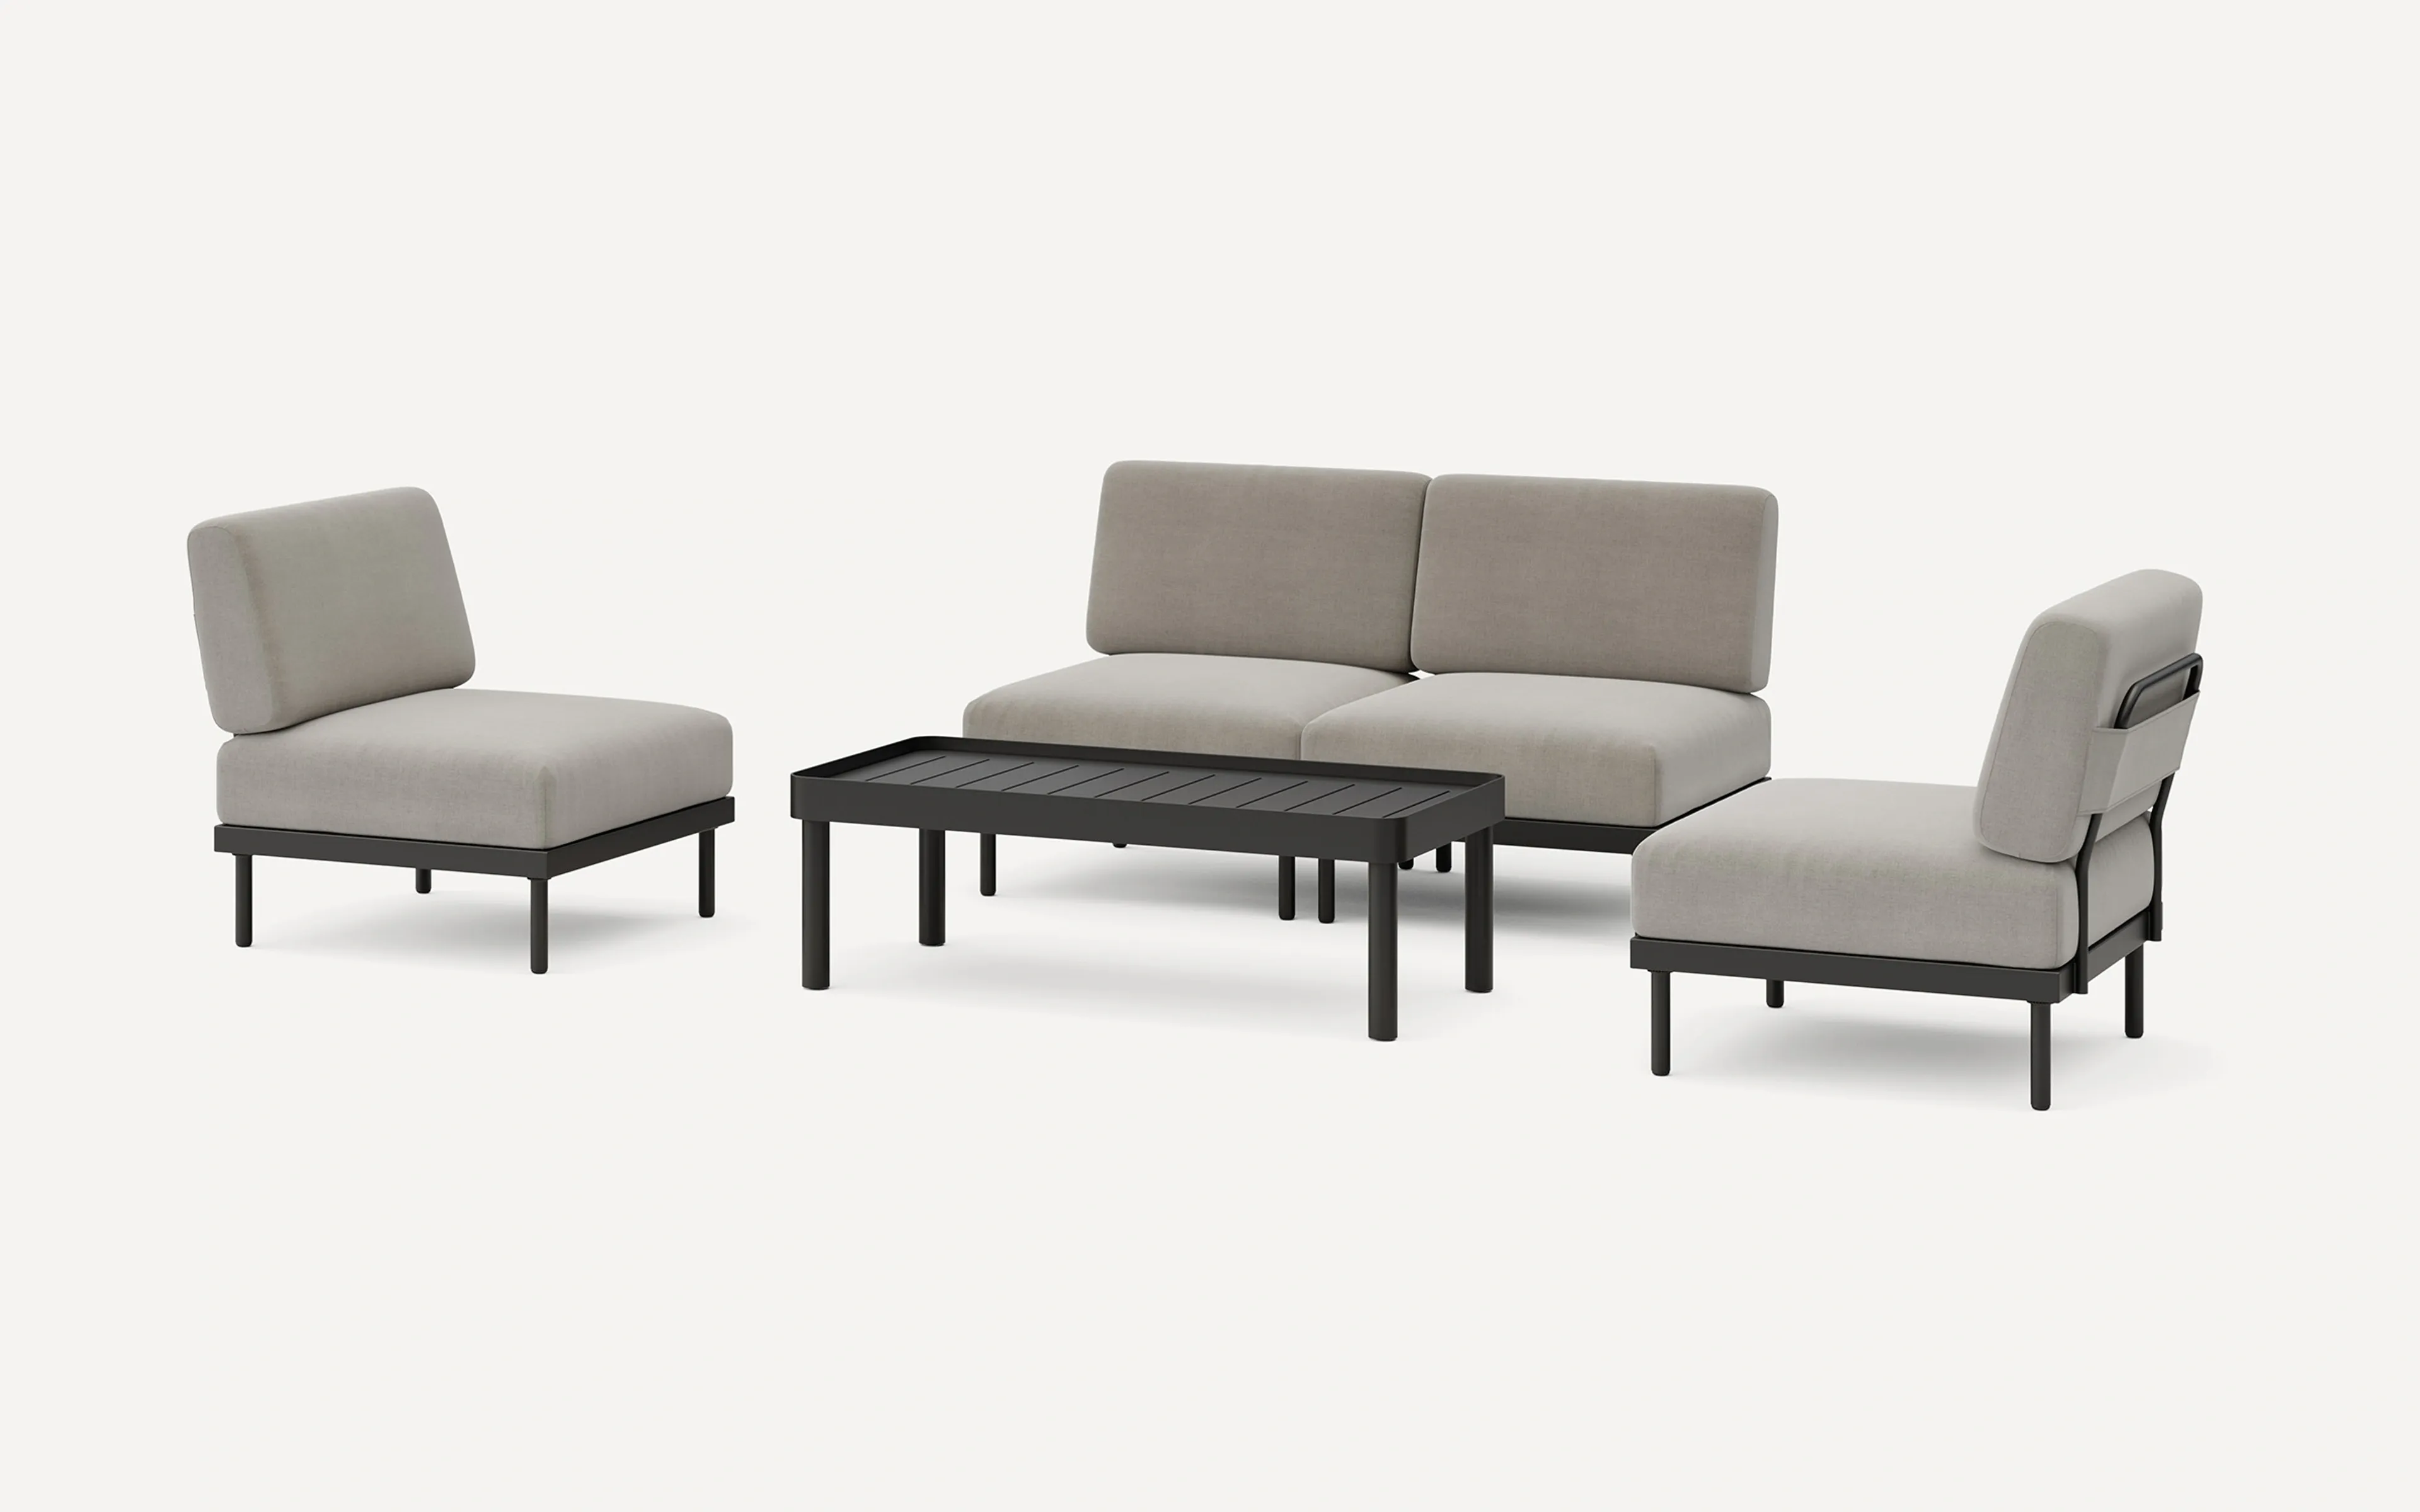 Relay Outdoor 2-Piece Armless Sofa, 2 Chairs, & Coffee Table Set